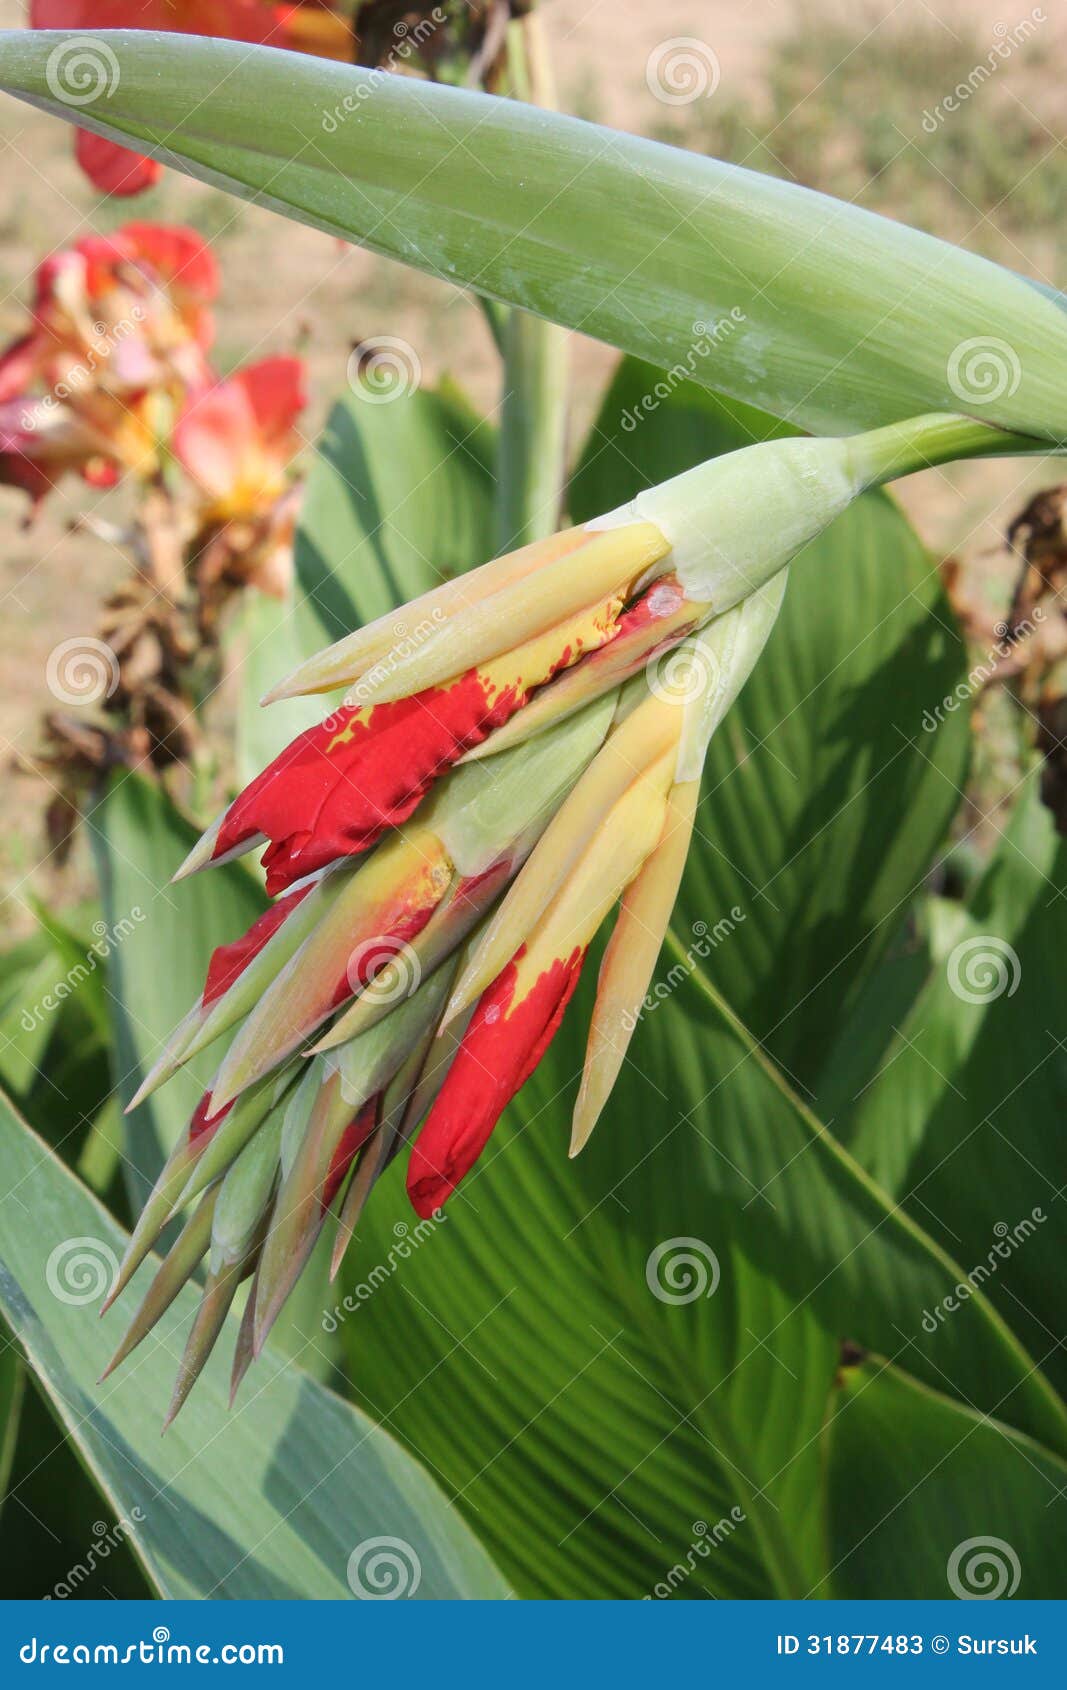 Red And Yellow Canna Flower Buds Stock Image Image Of Petals Outdoor 31877483